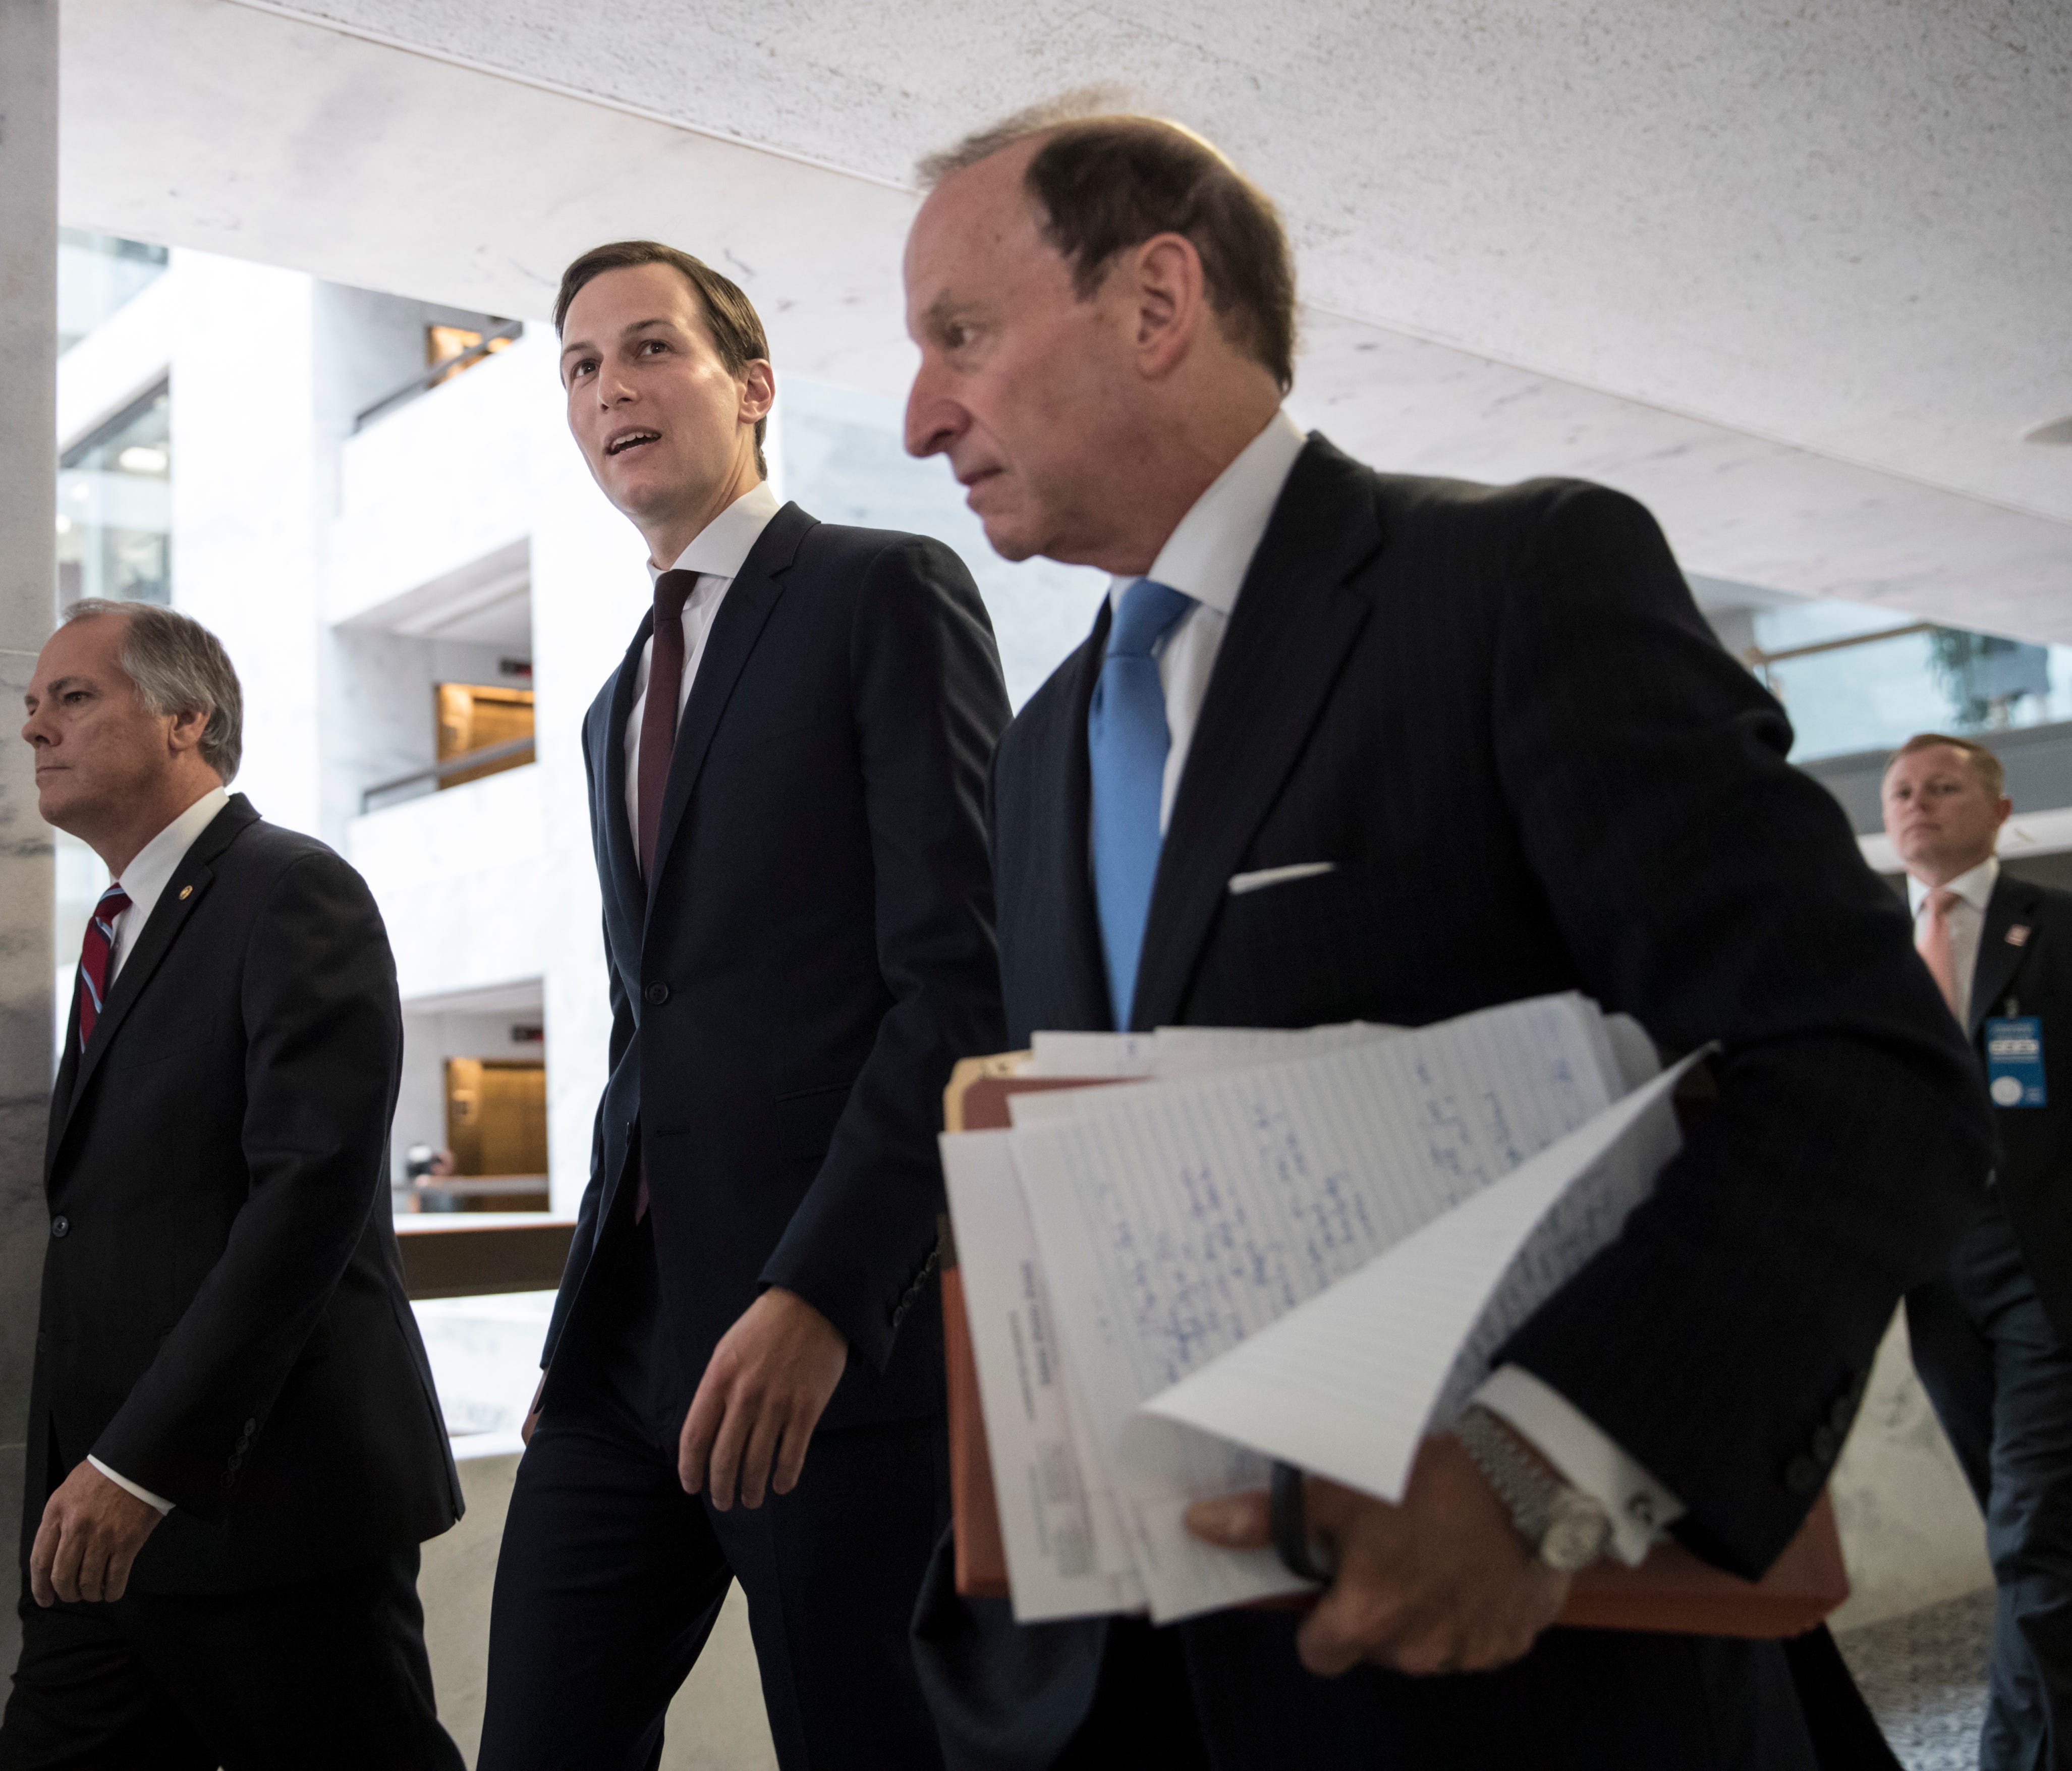 White House senior adviser Jared Kushner, center, and his attorney Abbe Lowell, right, depart Capitol Hill in Washington, Monday, July 24, 2017, after a closed-door interview with Senate Intelligence Committee investigators looking into Russia's elec